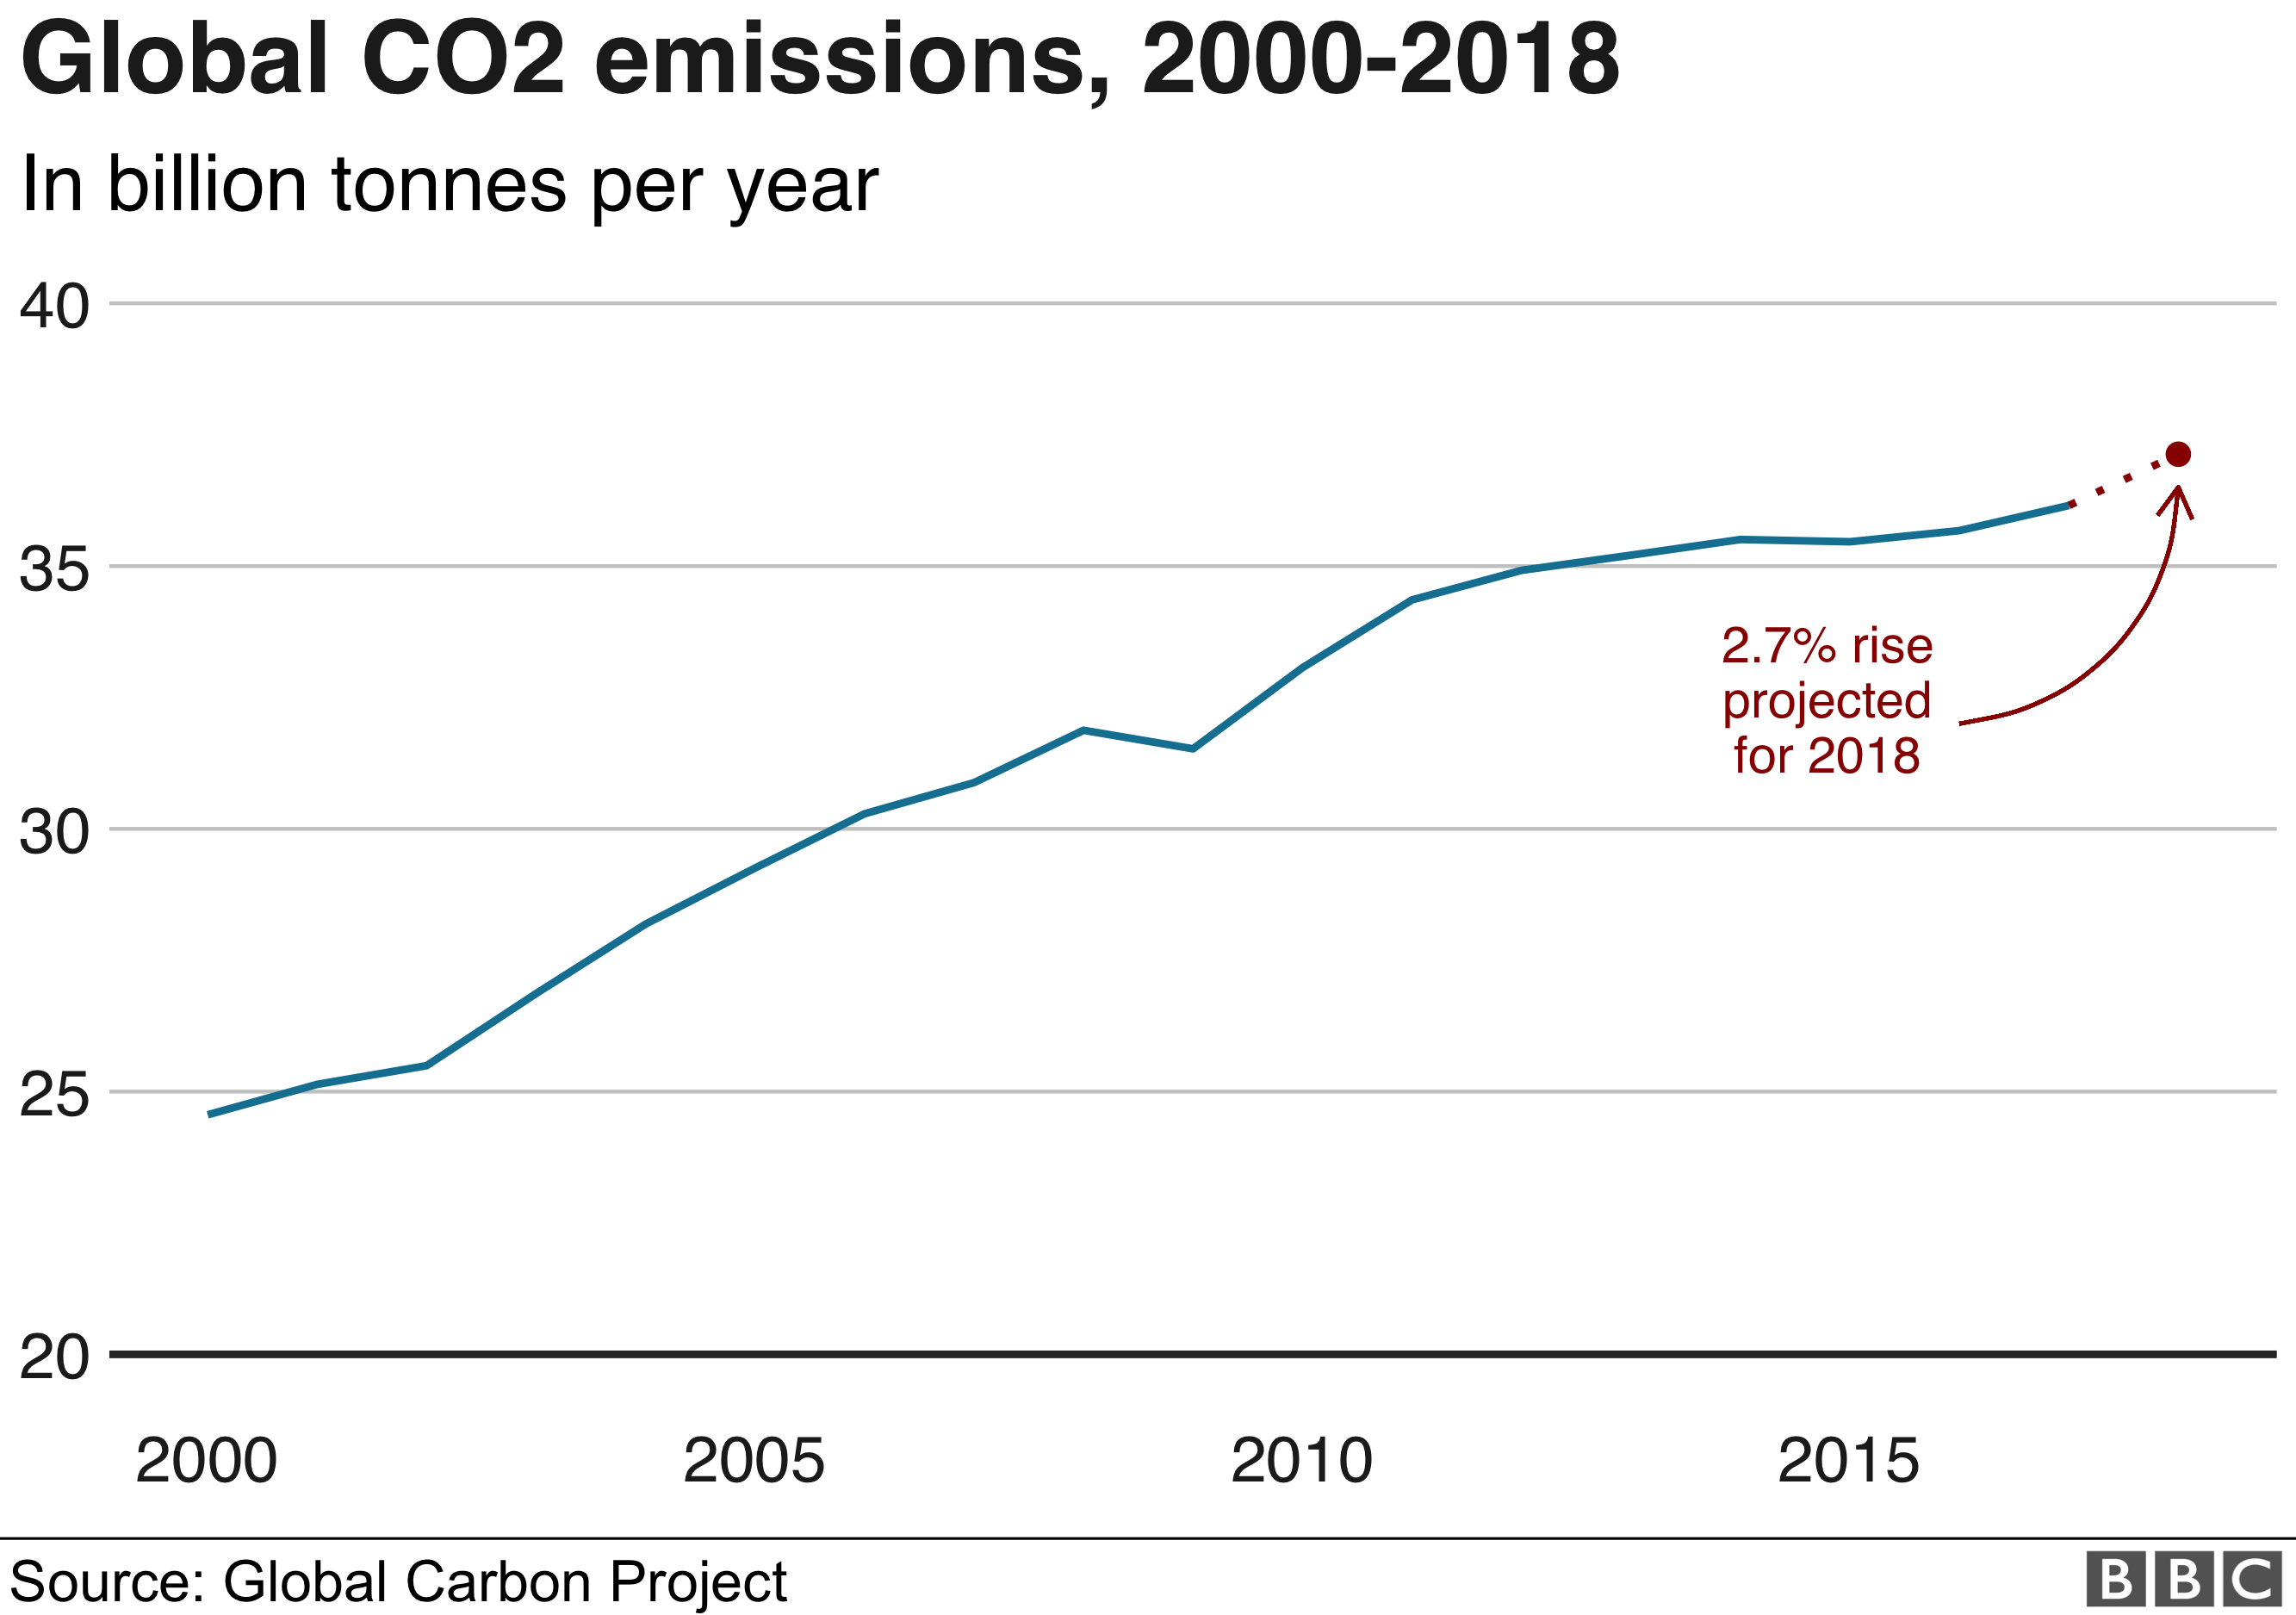 Cars and coal help drive 'strong' CO2 rise in 2018 BBC News